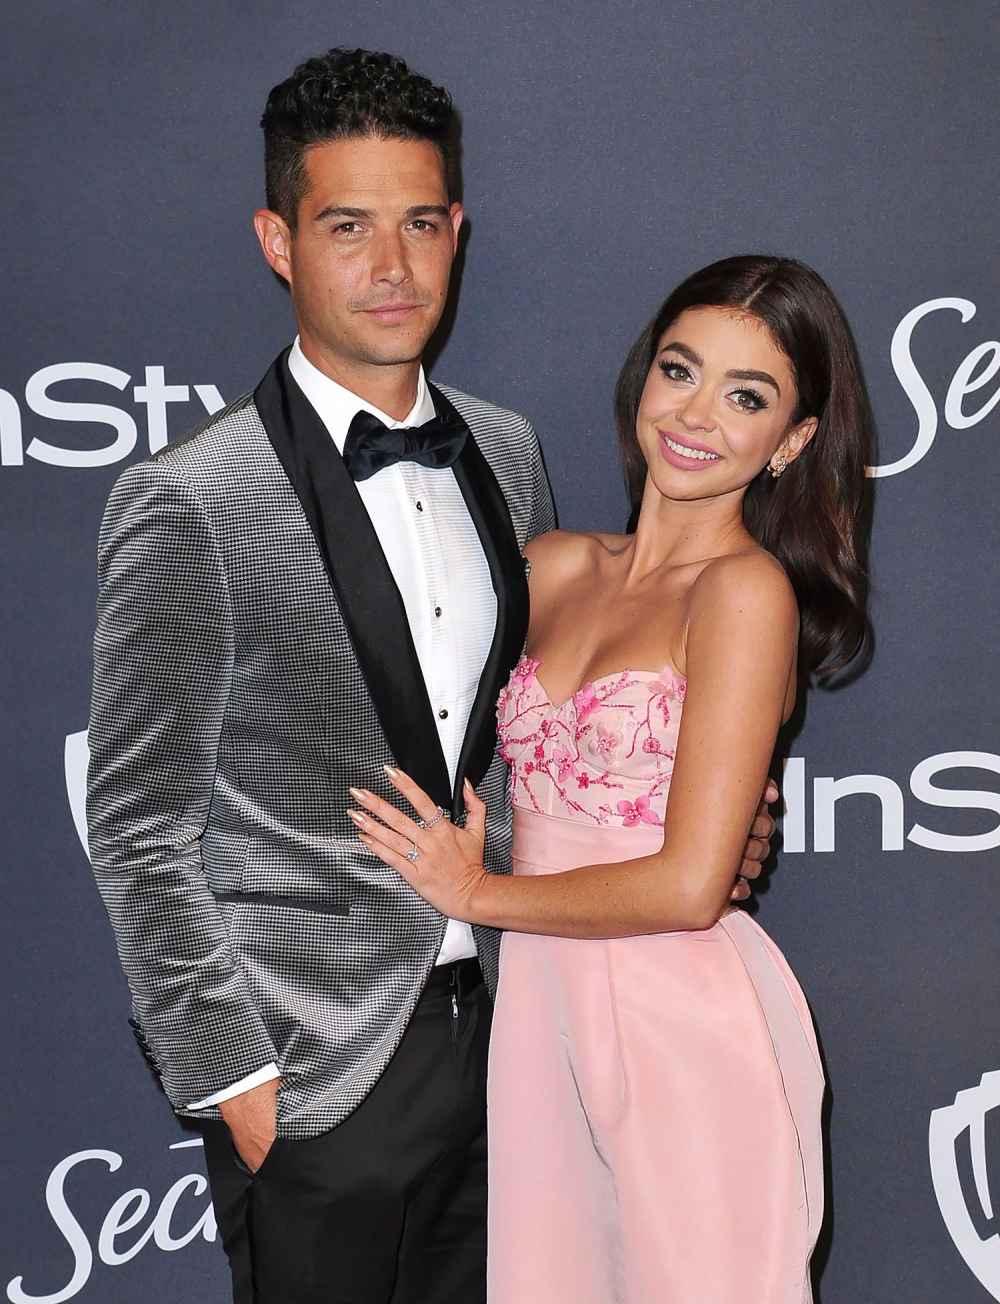 Sarah Hyland Confirms She and Wells Adams Put Their Wedding Plans ‘on Hold’ Amid Pandemic